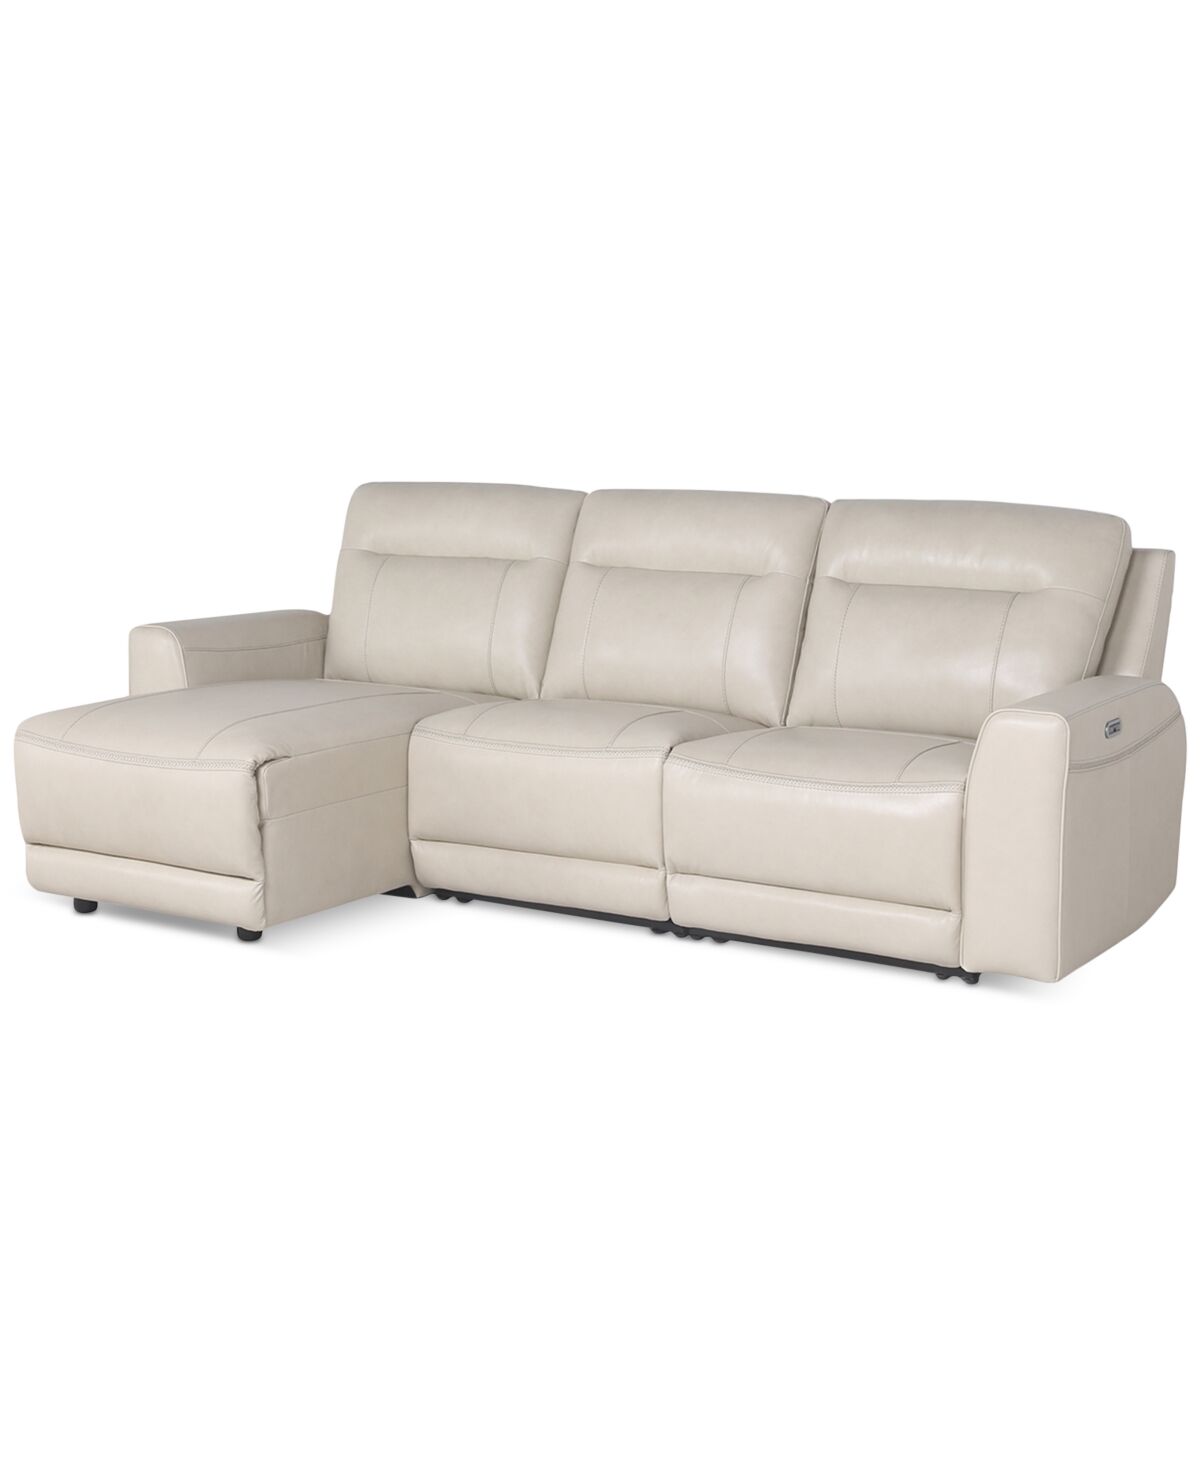 Macy's Closeout! Blairemoore 3-Pc. Leather Sofa with Power Chaise and 1 Power Recliner, Created for Macy's - Ice